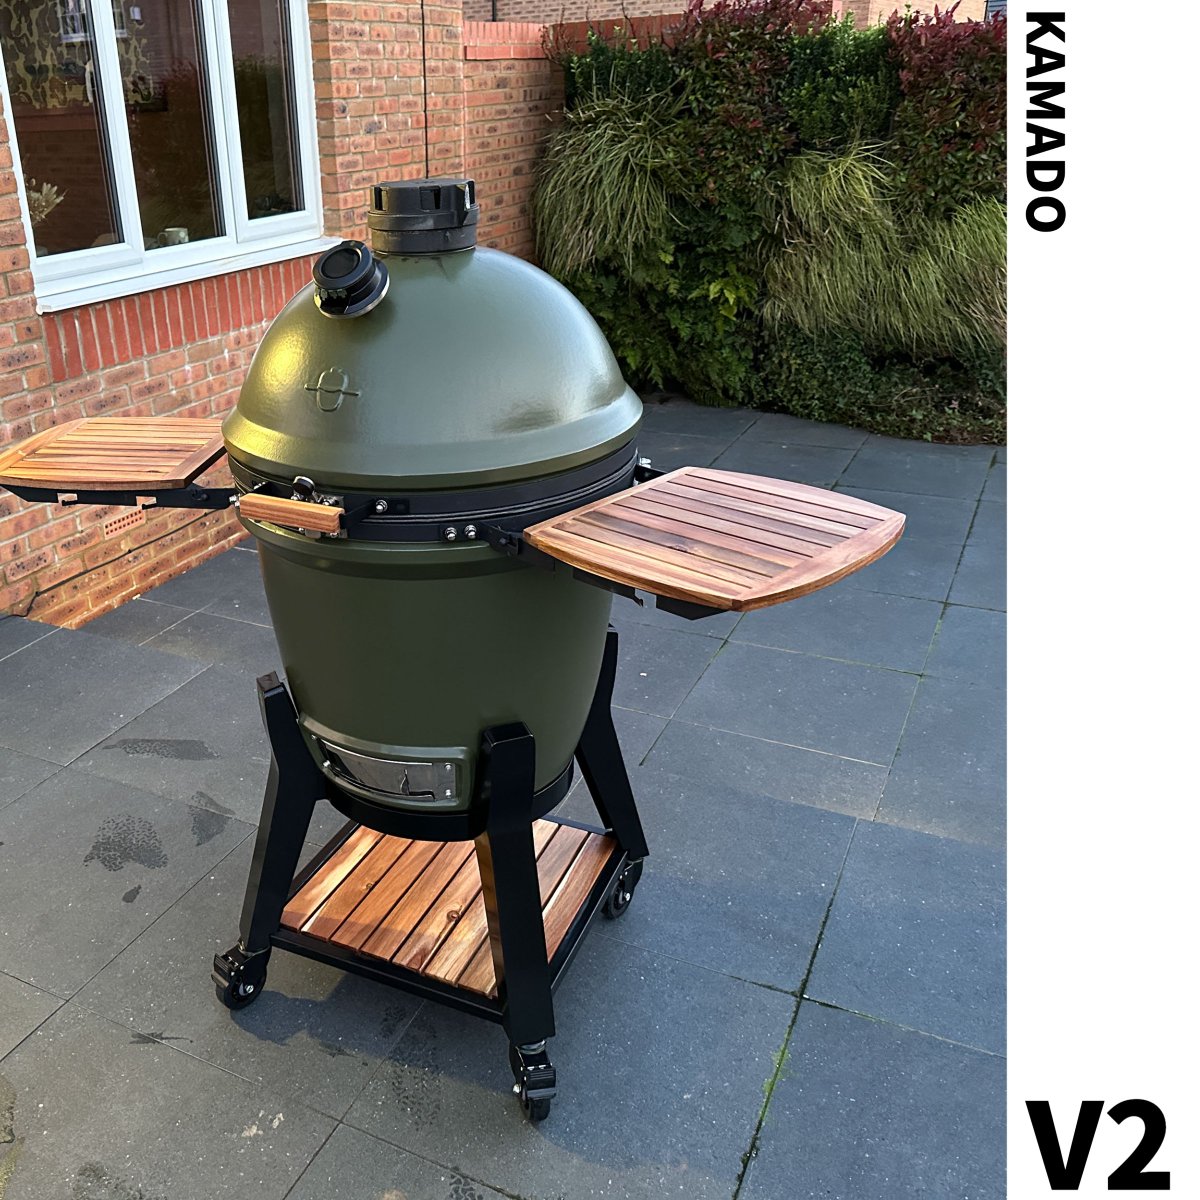 The New V2 Kamado leads by example. From a brand new stylish shape, to a magical new way to monitor your cooks and nail your core temps. A redesigned bottom air tunnel™ for best in class air control. Use outdoors all year round. #Kamado #Kamadogrill #ukbbq #outdoorcooking